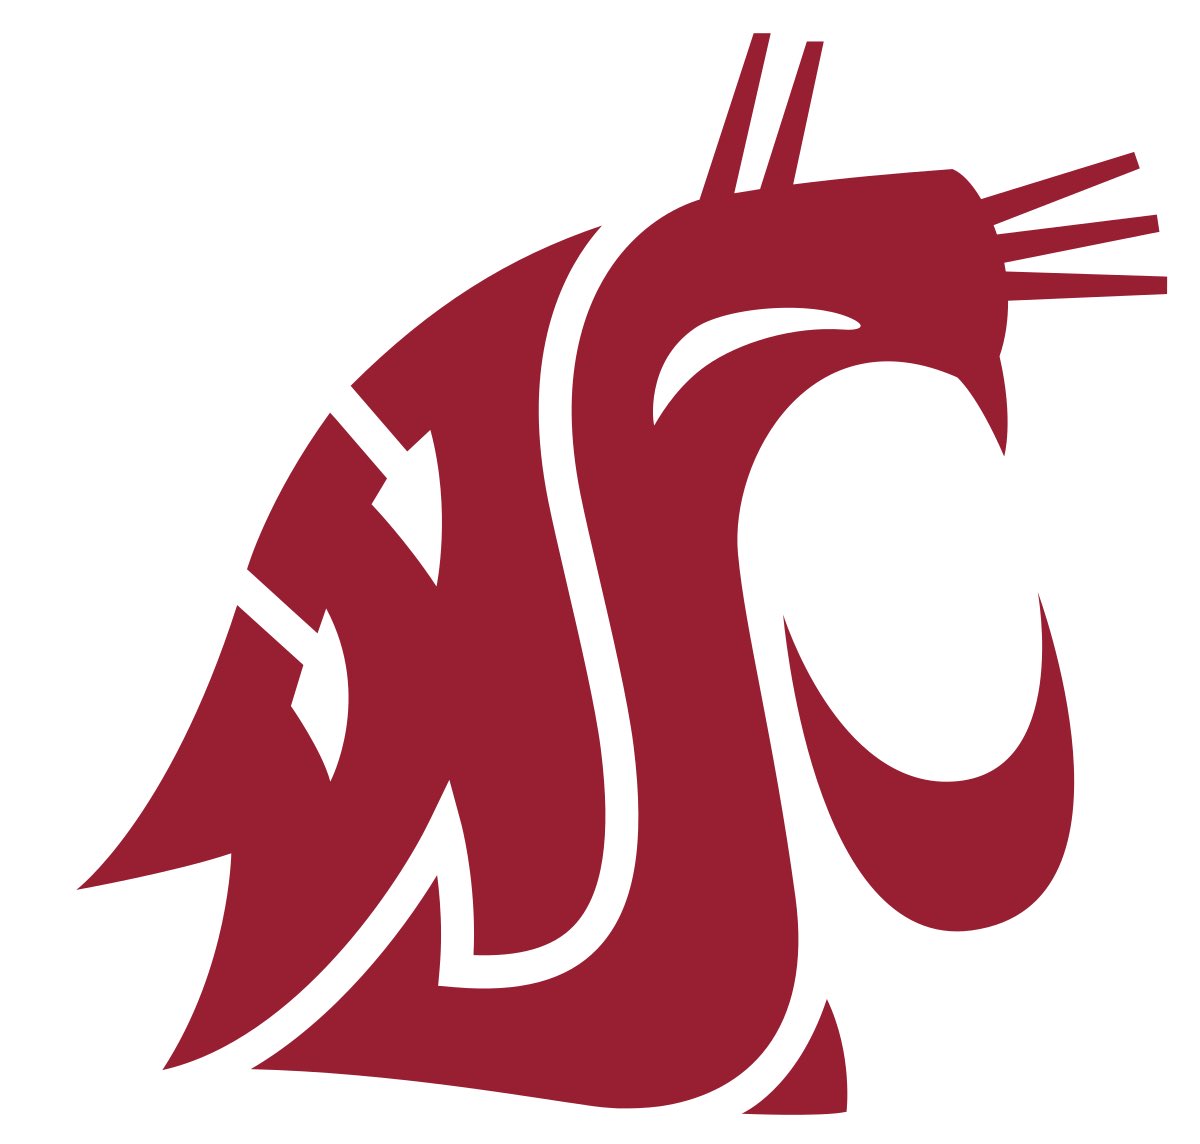 I’m blessed and excited to announce my 1st D1 Football offer to Washington State University! #GoCougars